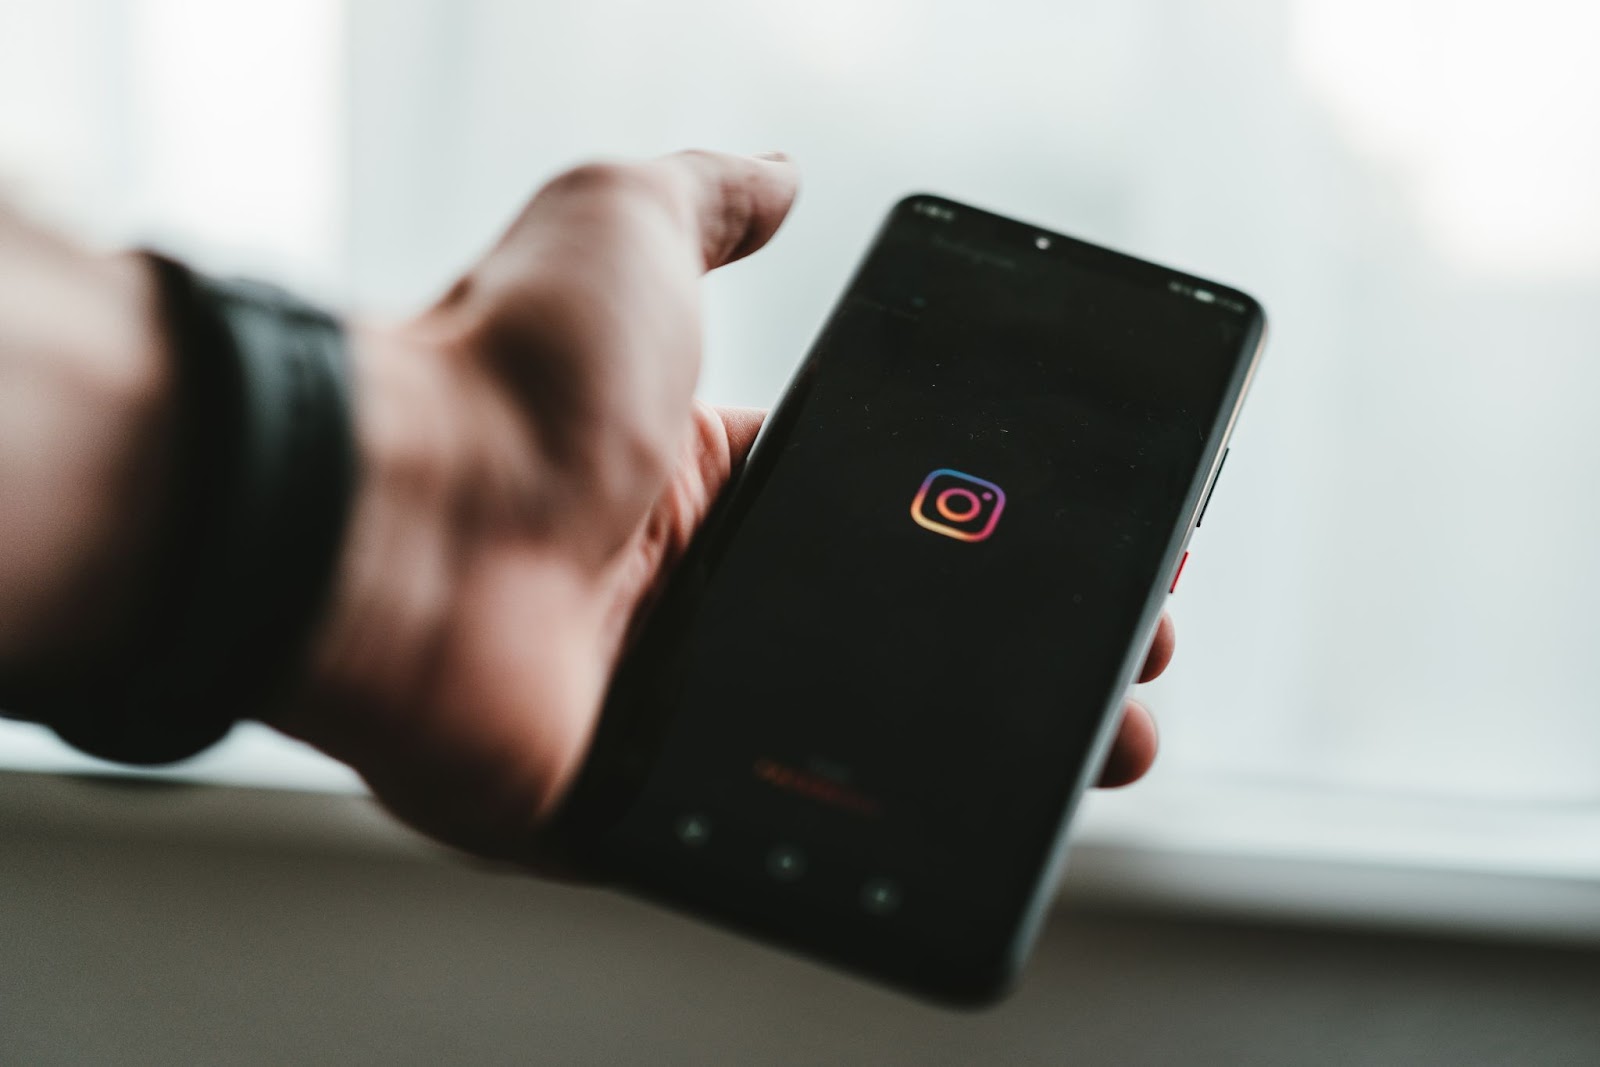 How To Block Hashtags On Instagram: A Step-By-Step Guide